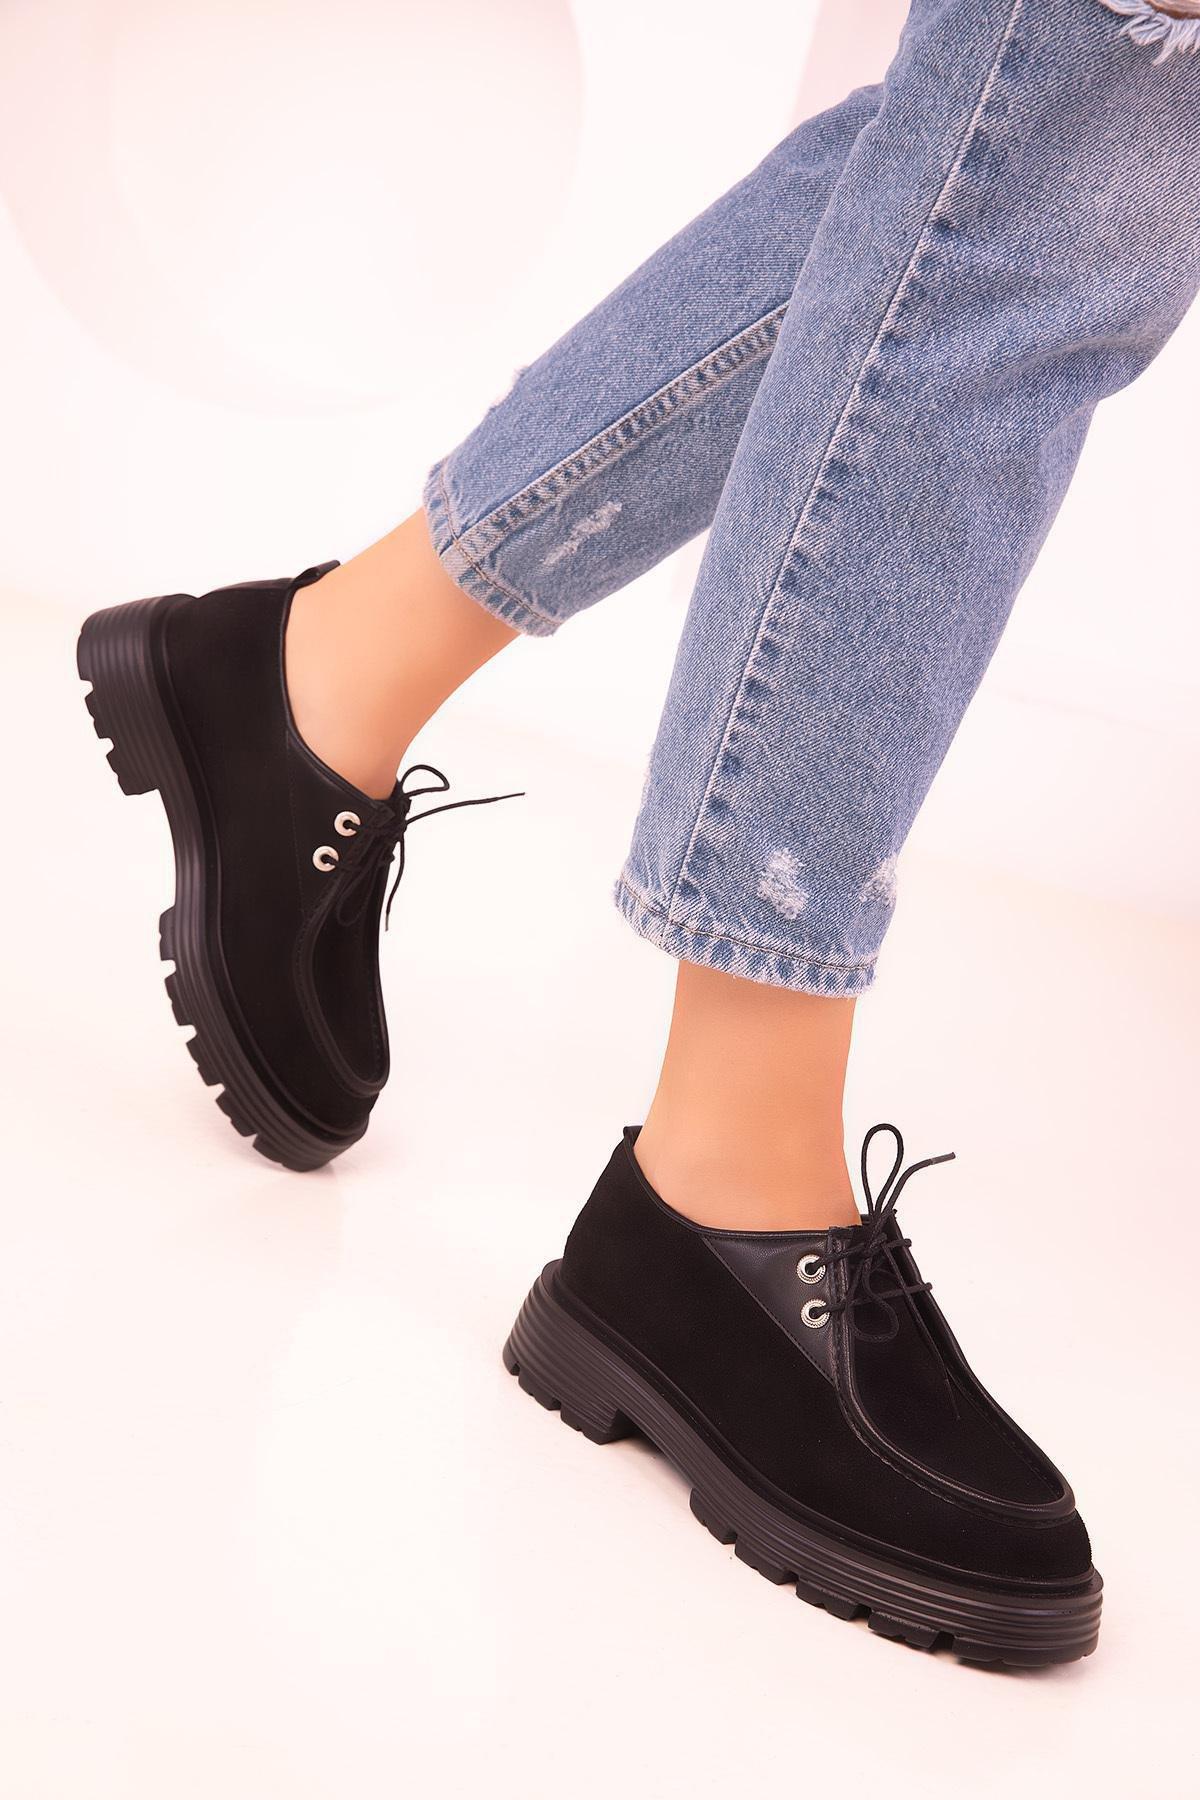 SOHO - Black Lace-Up Suede Casual Shoes